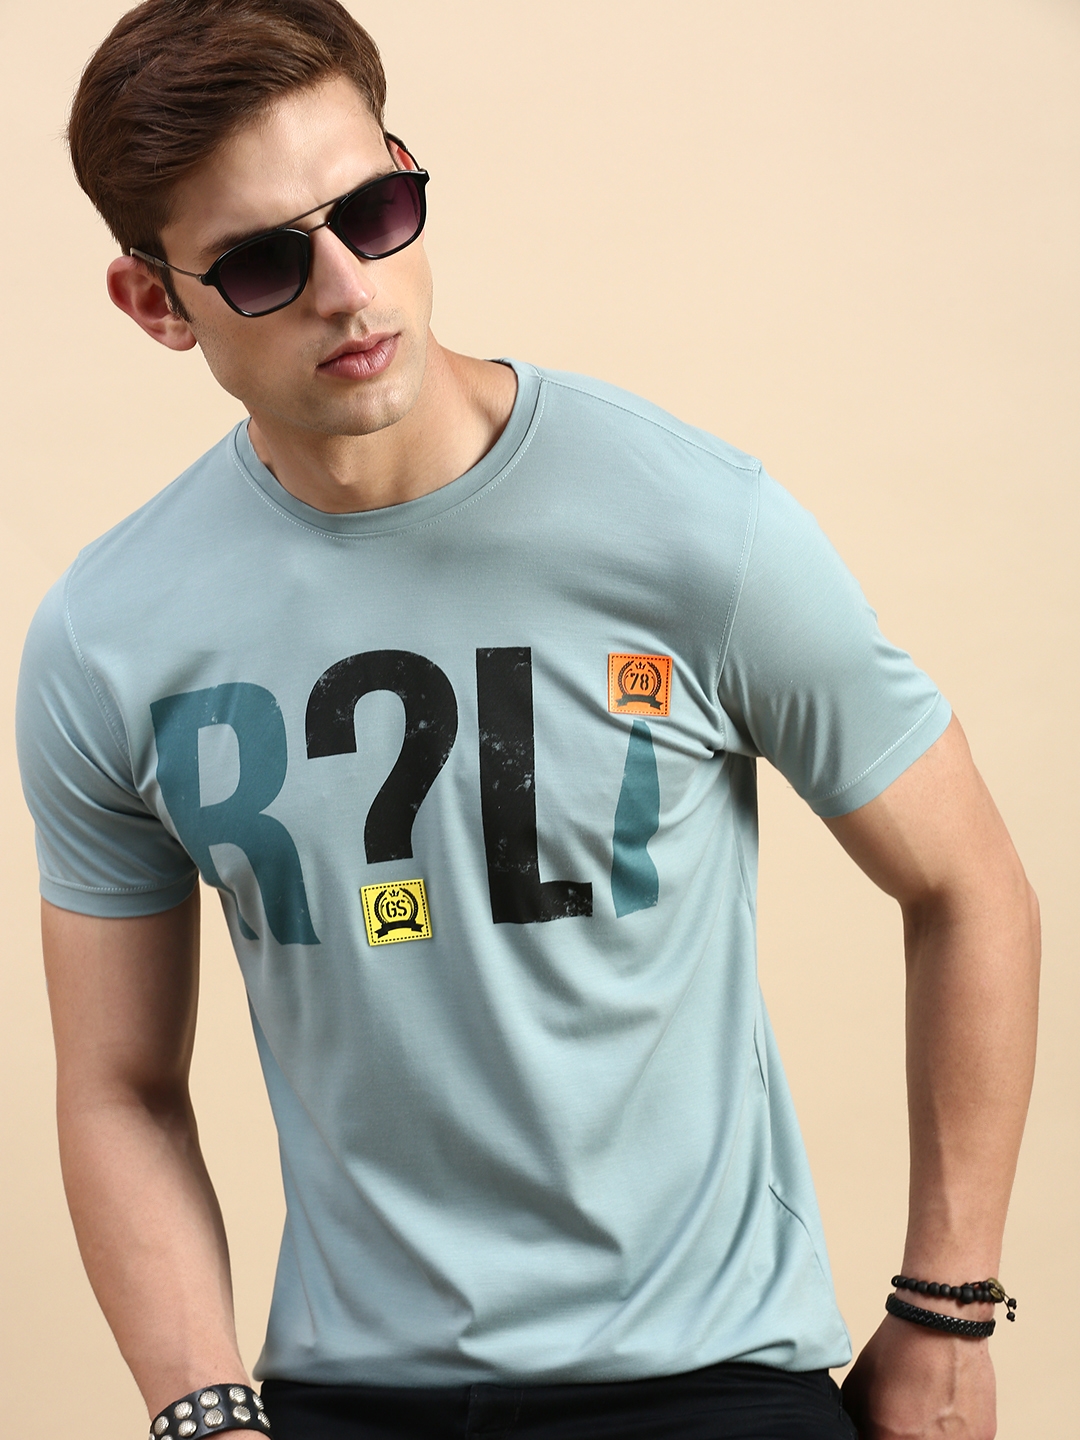 SHOWOFF Men's Round Neck Short Sleeves Typography Sea Green Slim Fit T-Shirt